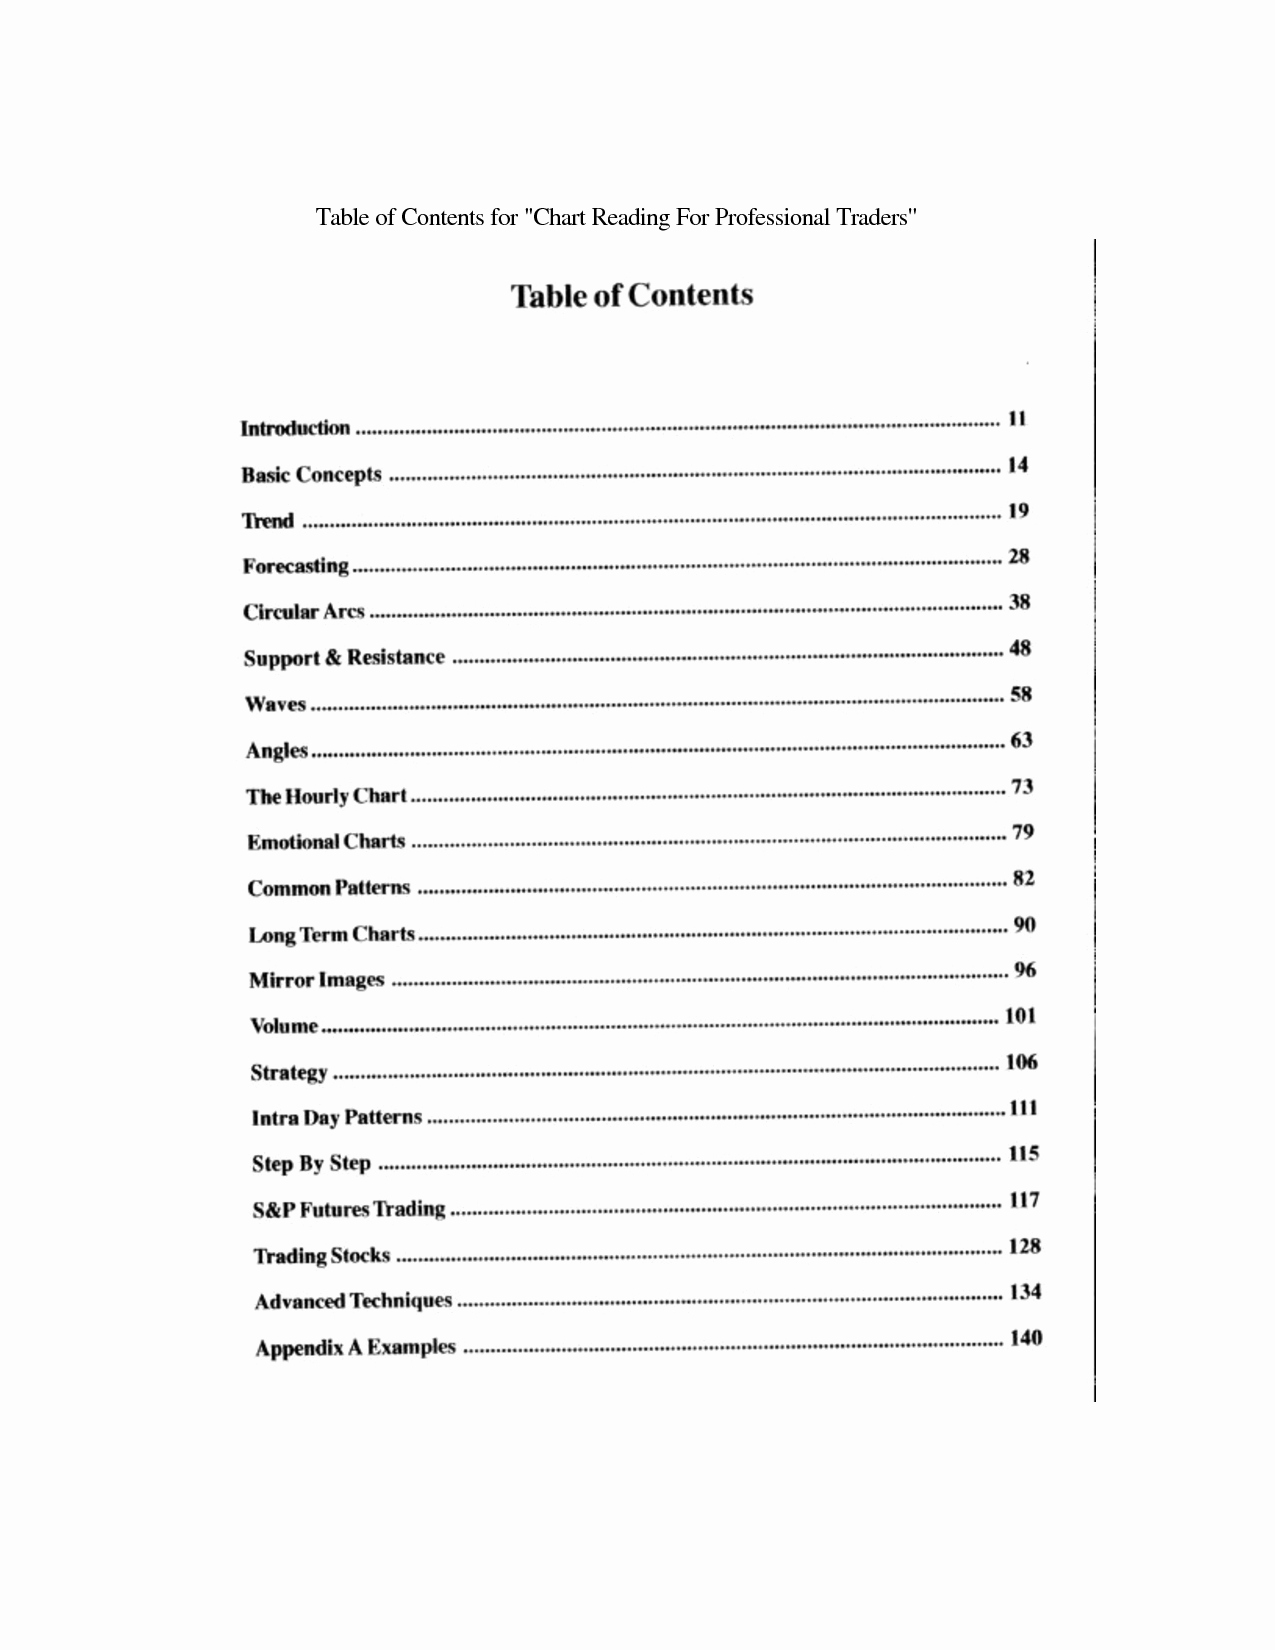 Table Of Contents Sample Page Beautiful Best S Of Professional Table Contents Example